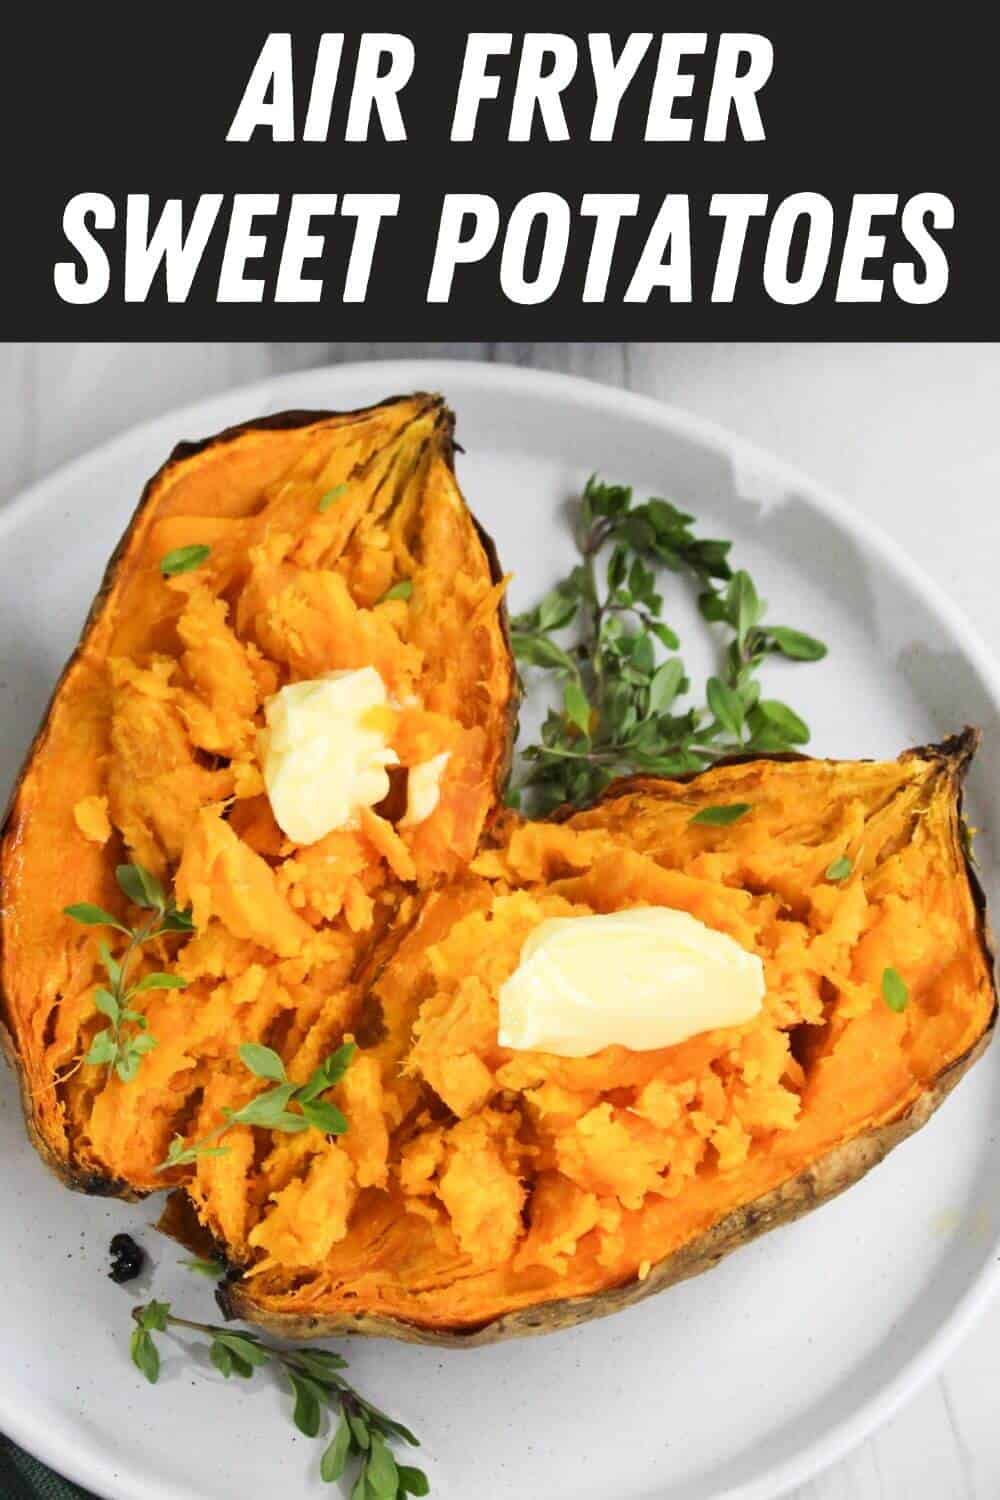 Air fryer sweet potatoes on a white plate.